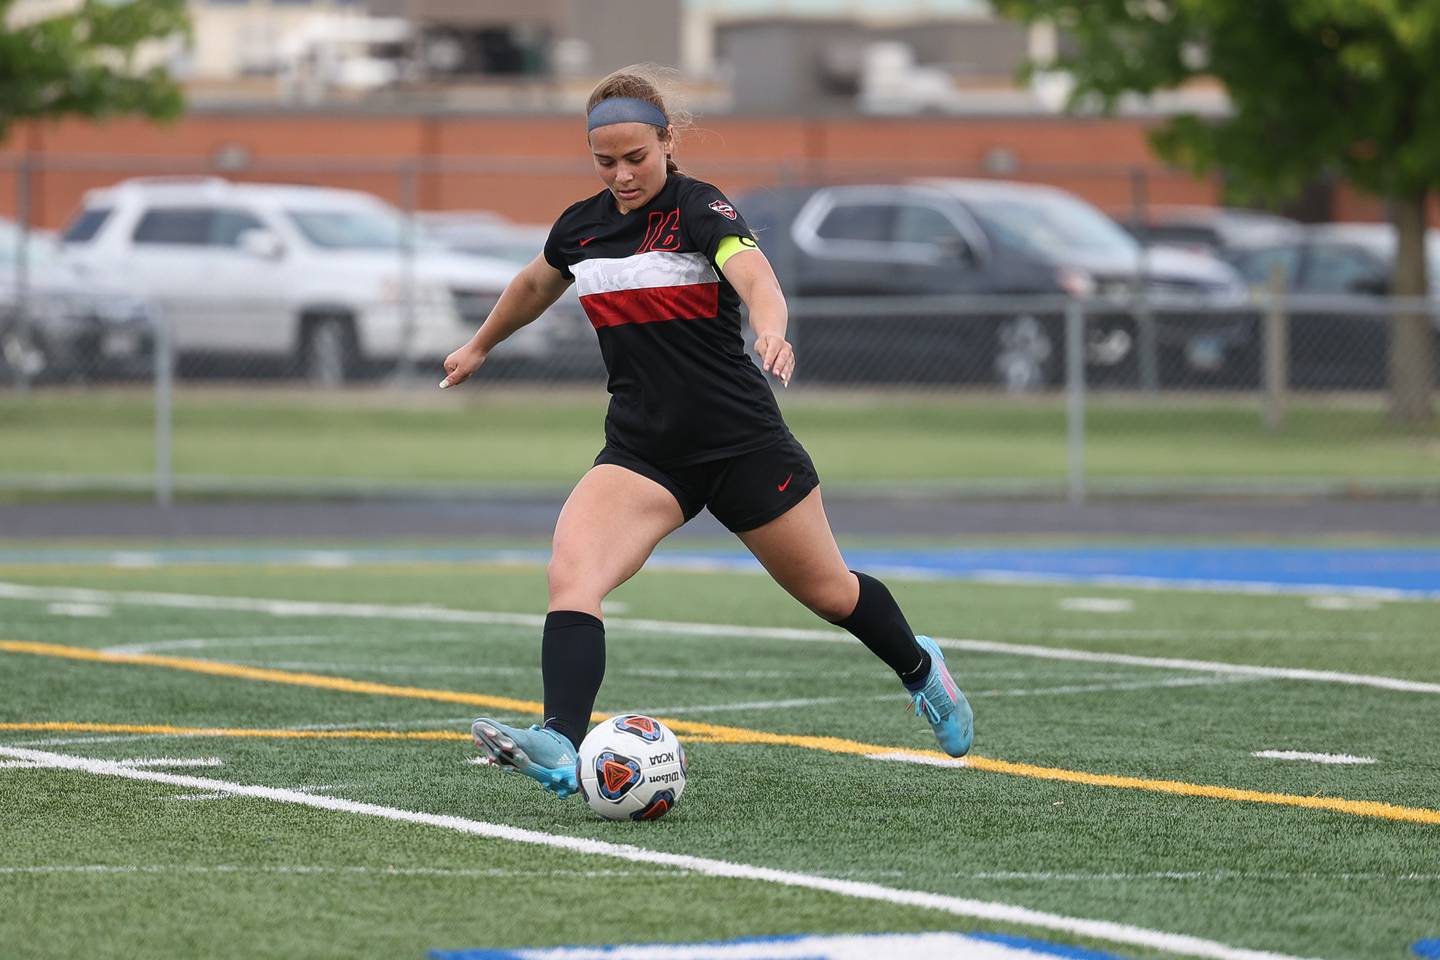 Lincoln-Way Central’s Grace Grundhofer passes the ball against Andrew in the Class 3A Sandburg Sectional semifinal. Tuesday, May 24 2022, in Orland Park.